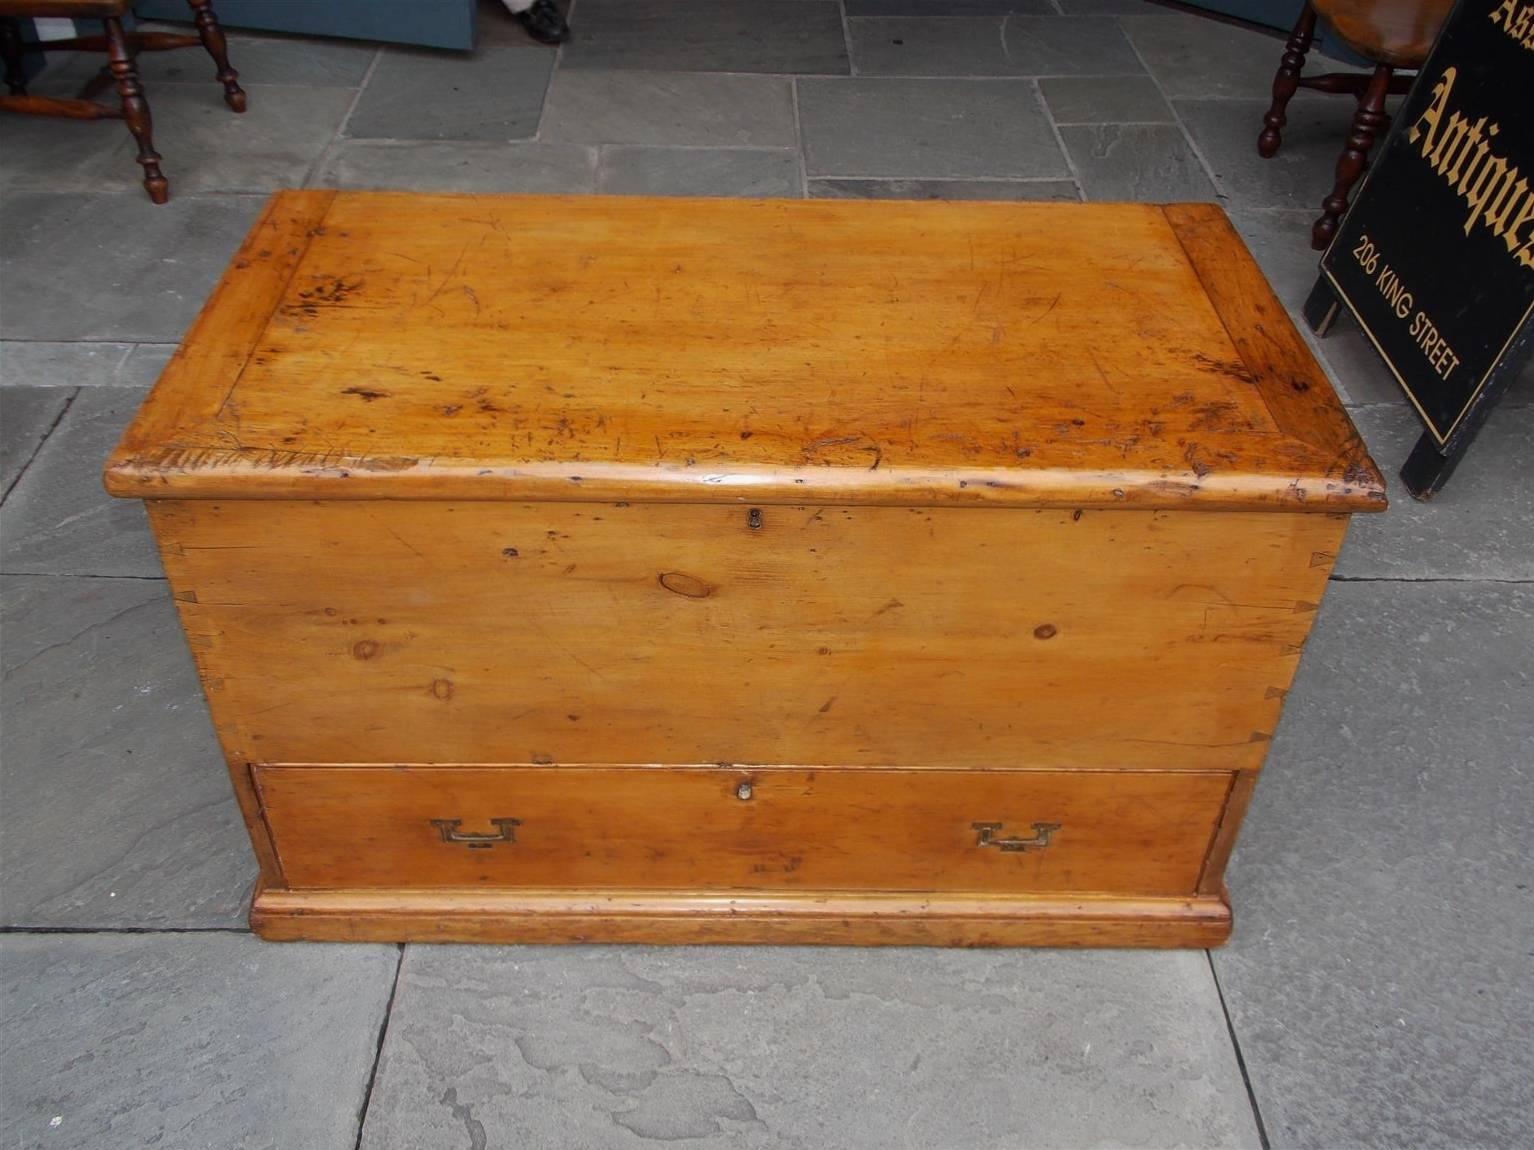 American white pine sailor's nautical traveling chest with upper hinged top, exposed dovetailing, fitted interior compartment revealing till and two hidden drawers, single exterior lower case drawer, original recessed brasses with wrought iron side